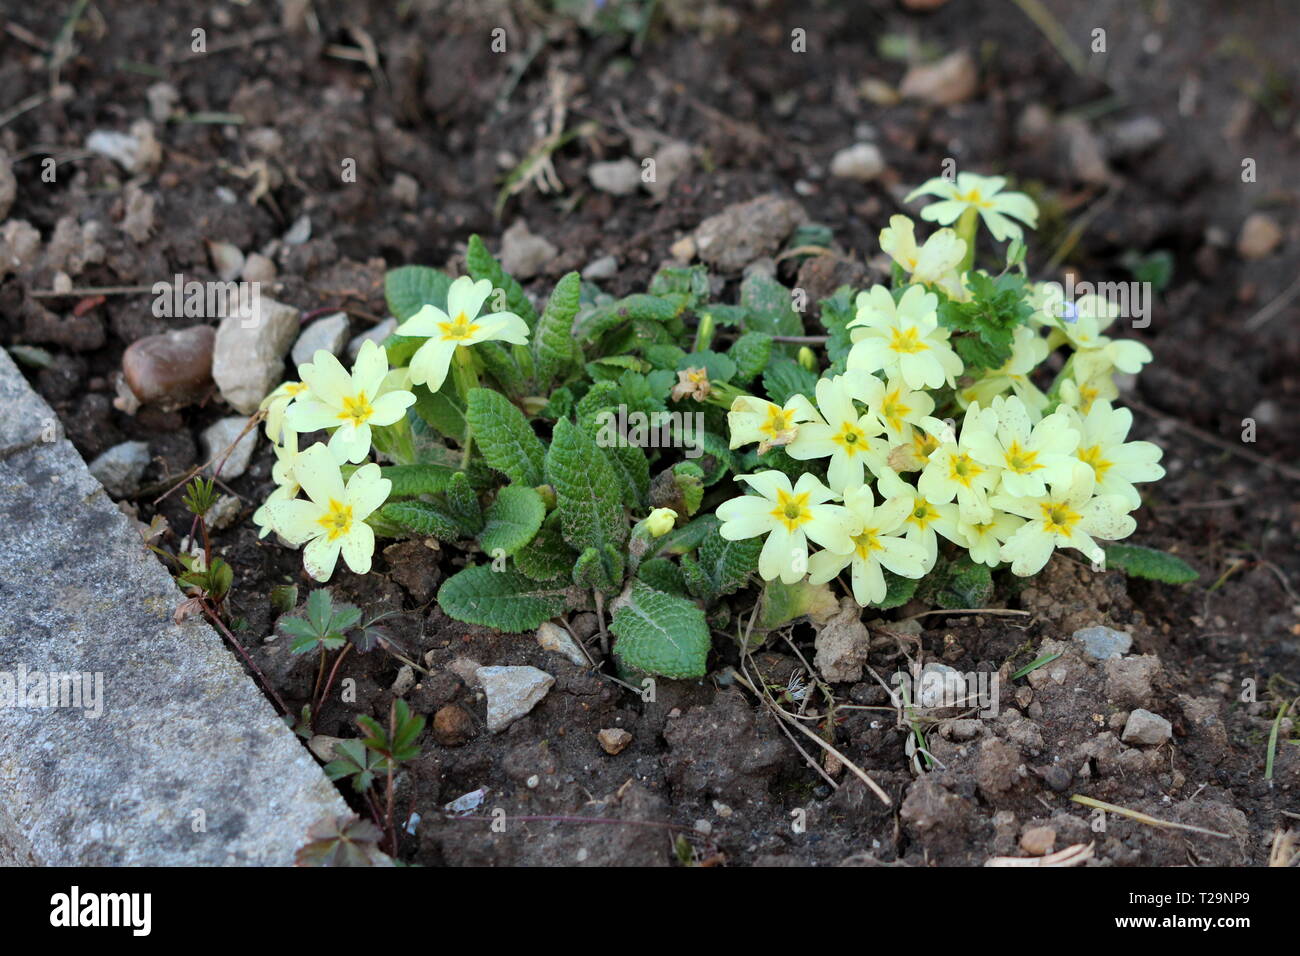 Primrose Or Primula Vulgaris Or Common Primrose Or English Primrose Small Yellow Flowers With Thick Dark Green Leaves Surrounded With Wet Soil Stock Photo Alamy